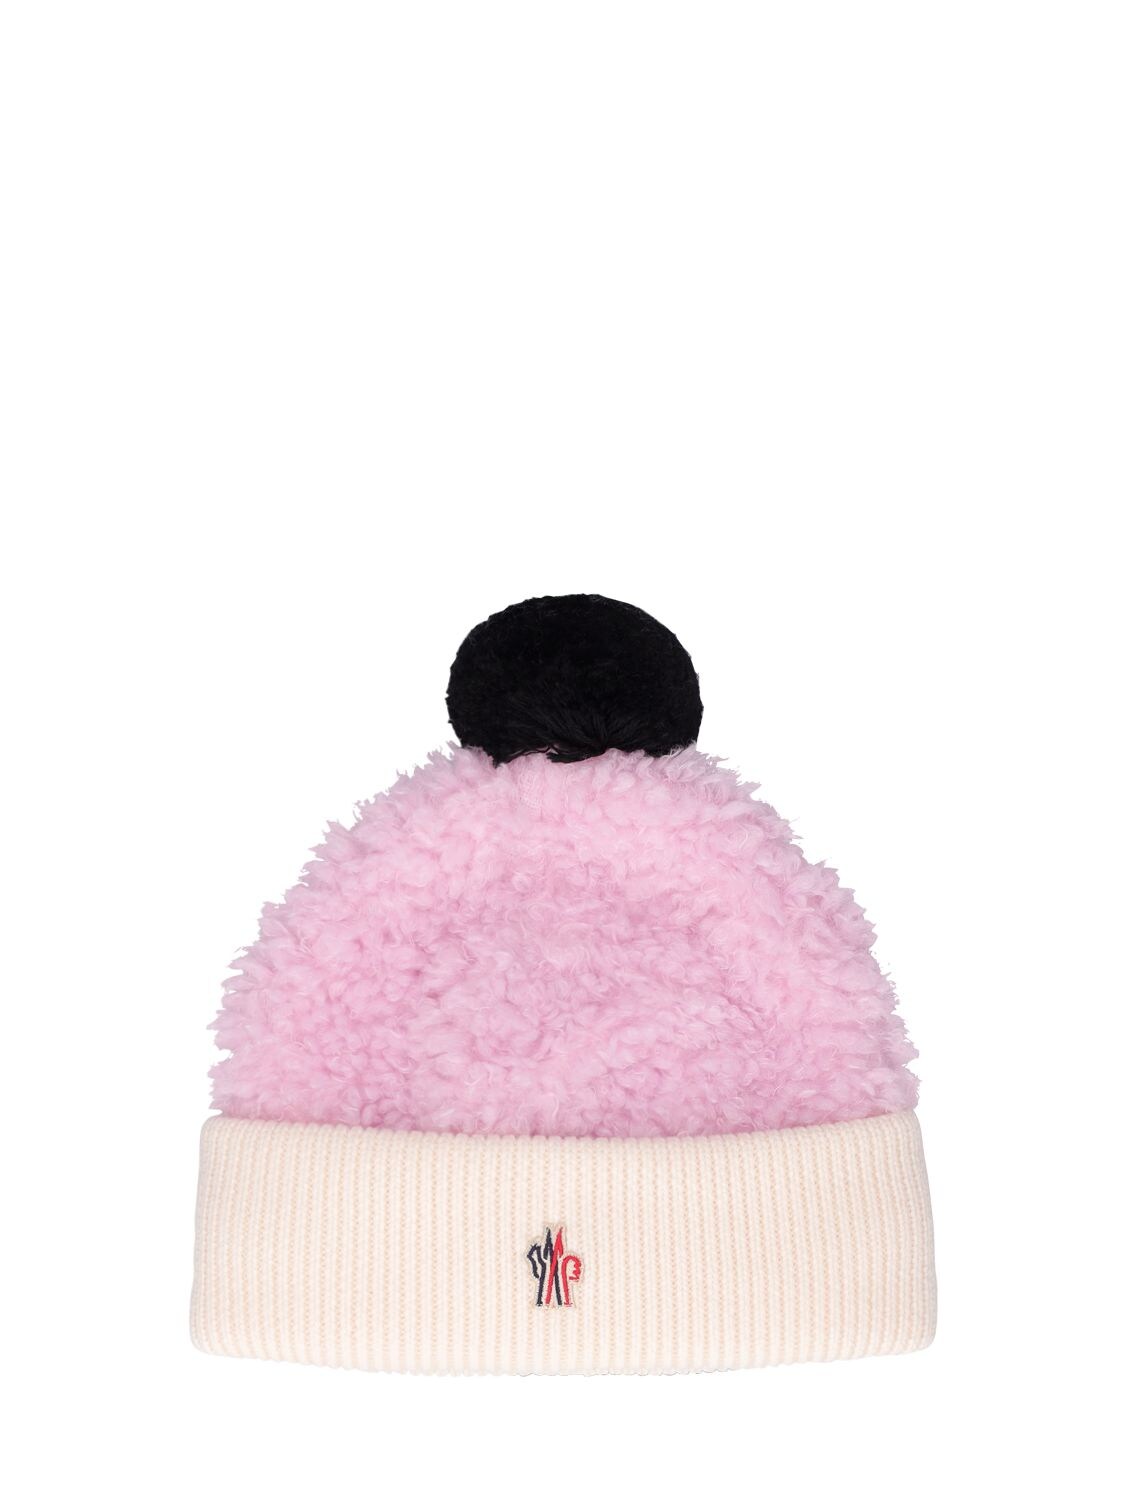 Moncler Grenoble Babies' Wool Plush Beanie Hat W/ Pompom In Pink